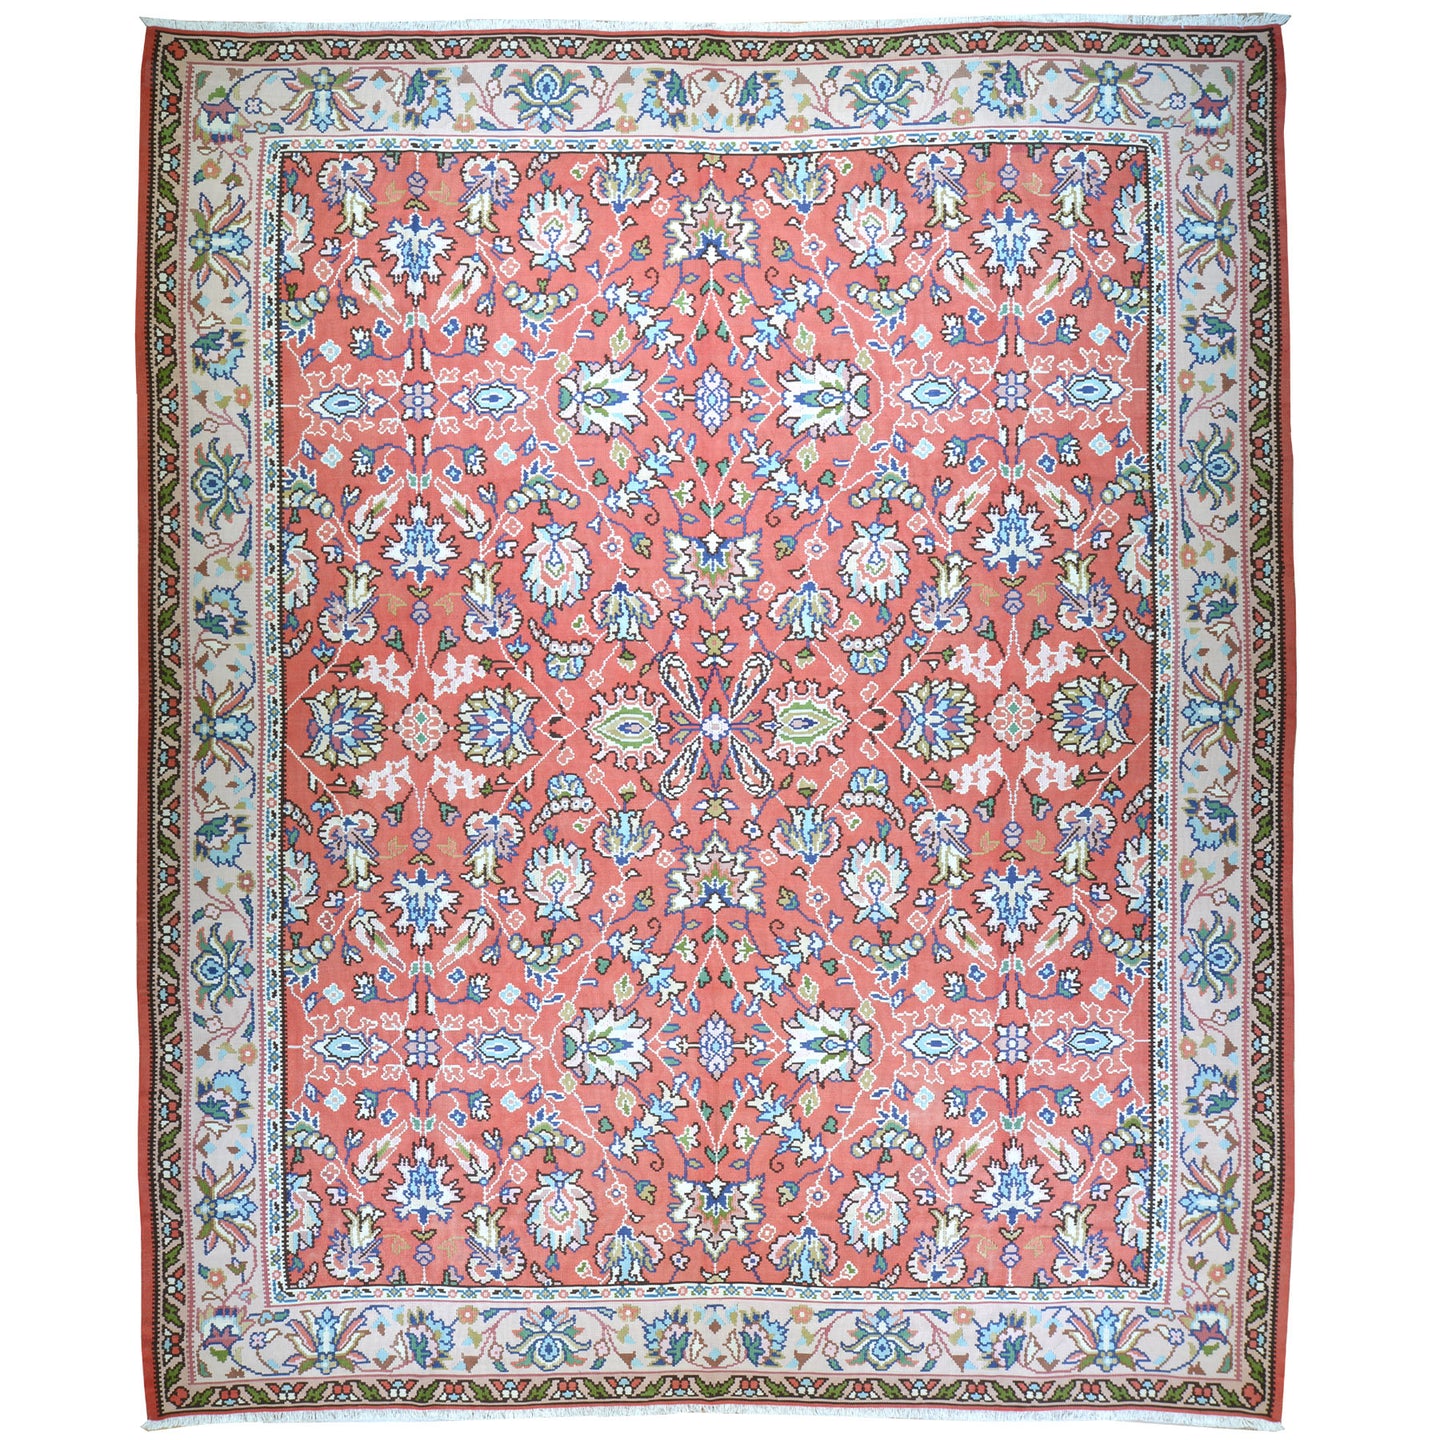 Oriental rugs, hand-knotted carpets, sustainable rugs, classic world oriental rugs, handmade, United States, interior design,  Brrsf-579